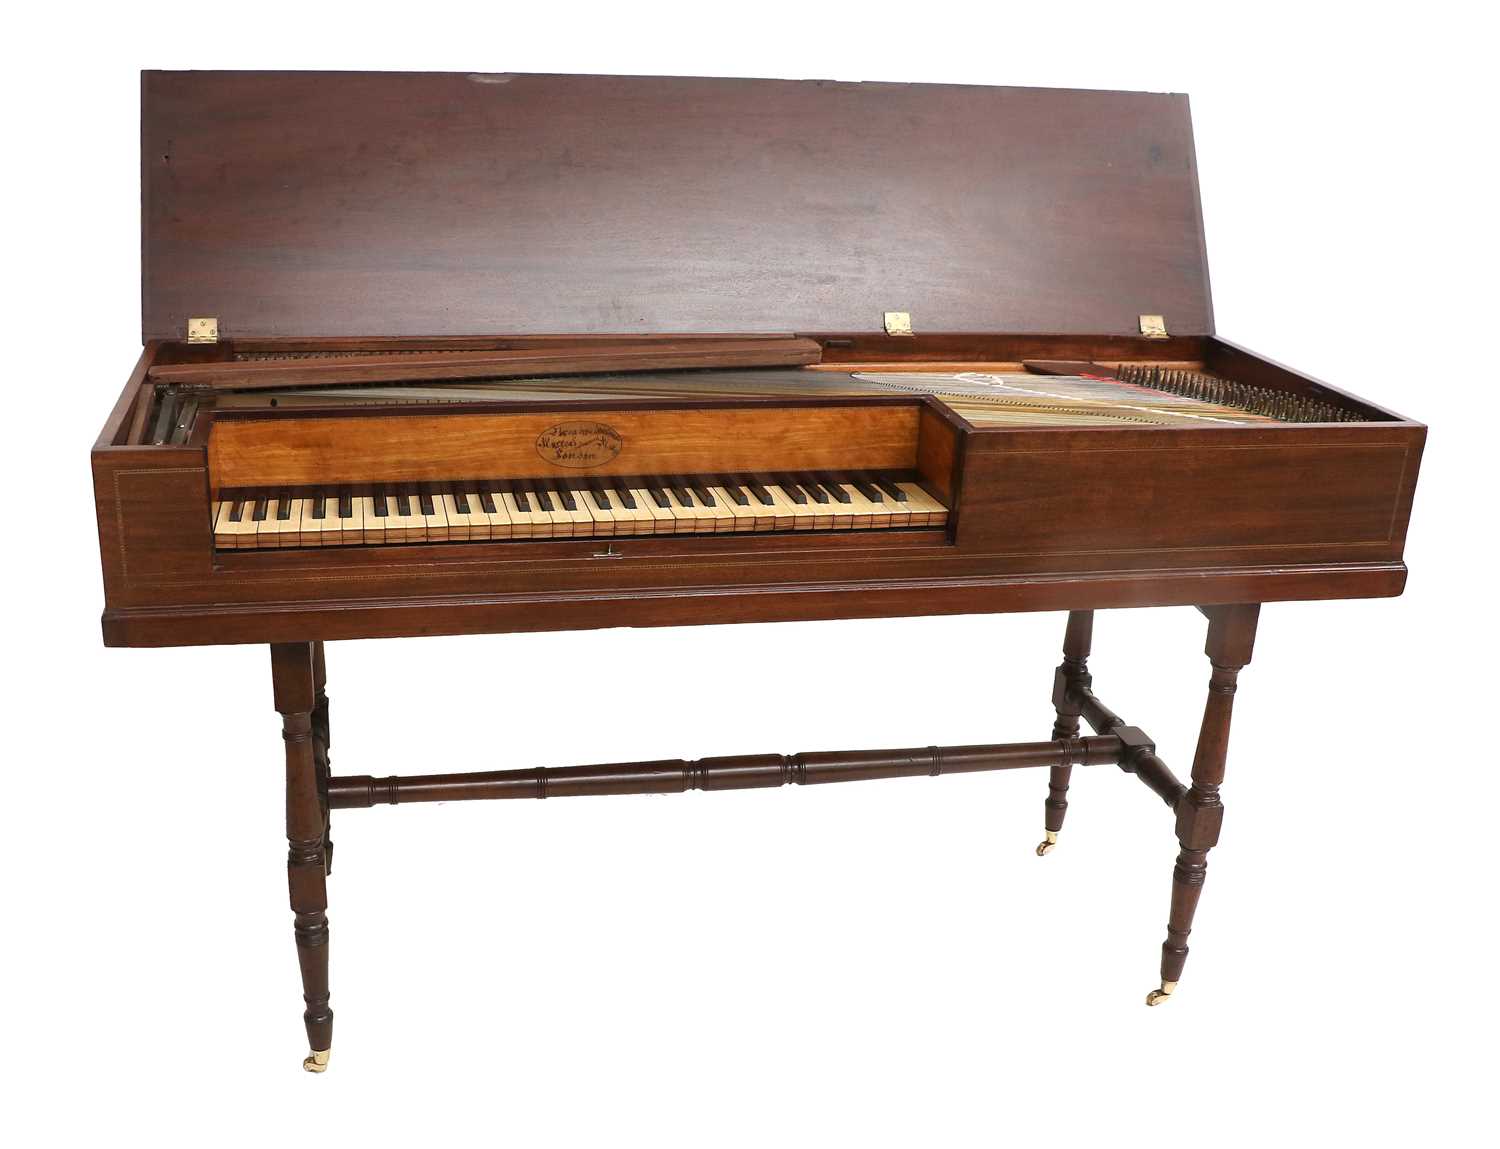 A George III Mahogany and Parquetry-Decorated Square Piano, circa 1800, the hinged lid enclosing a